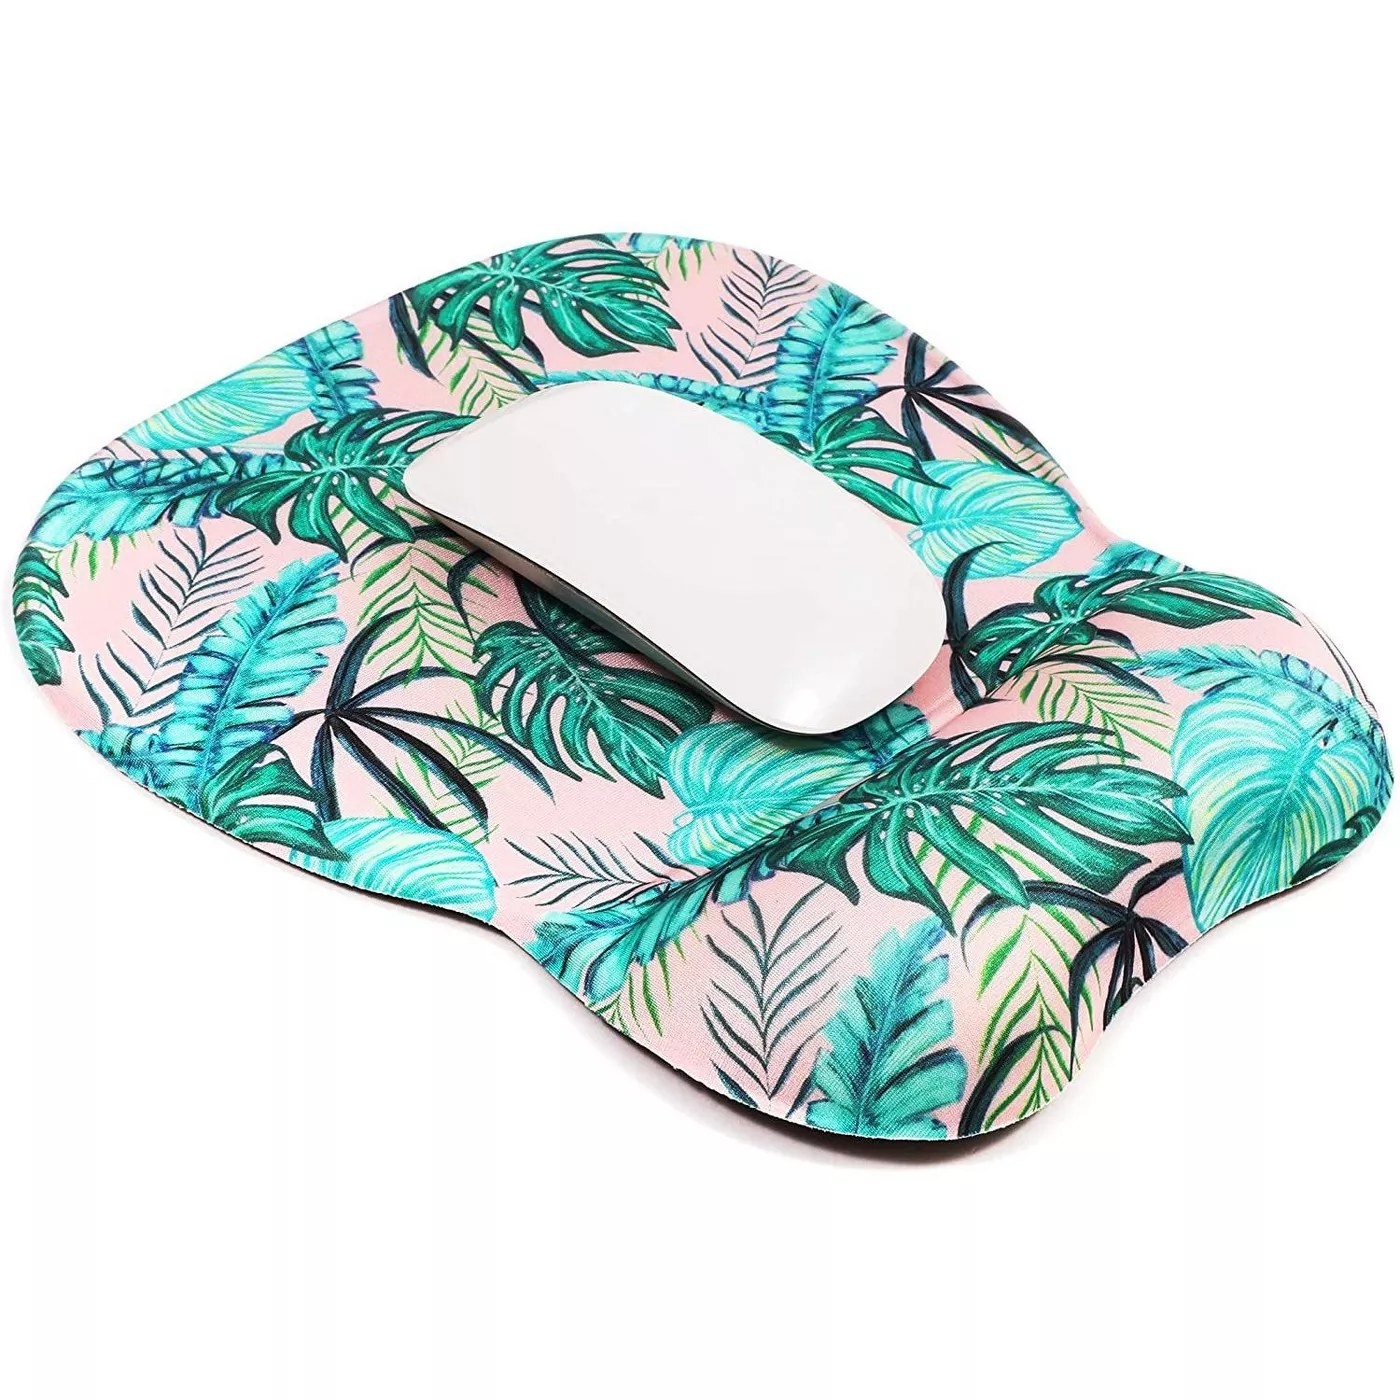 The tropical palm mouse pad